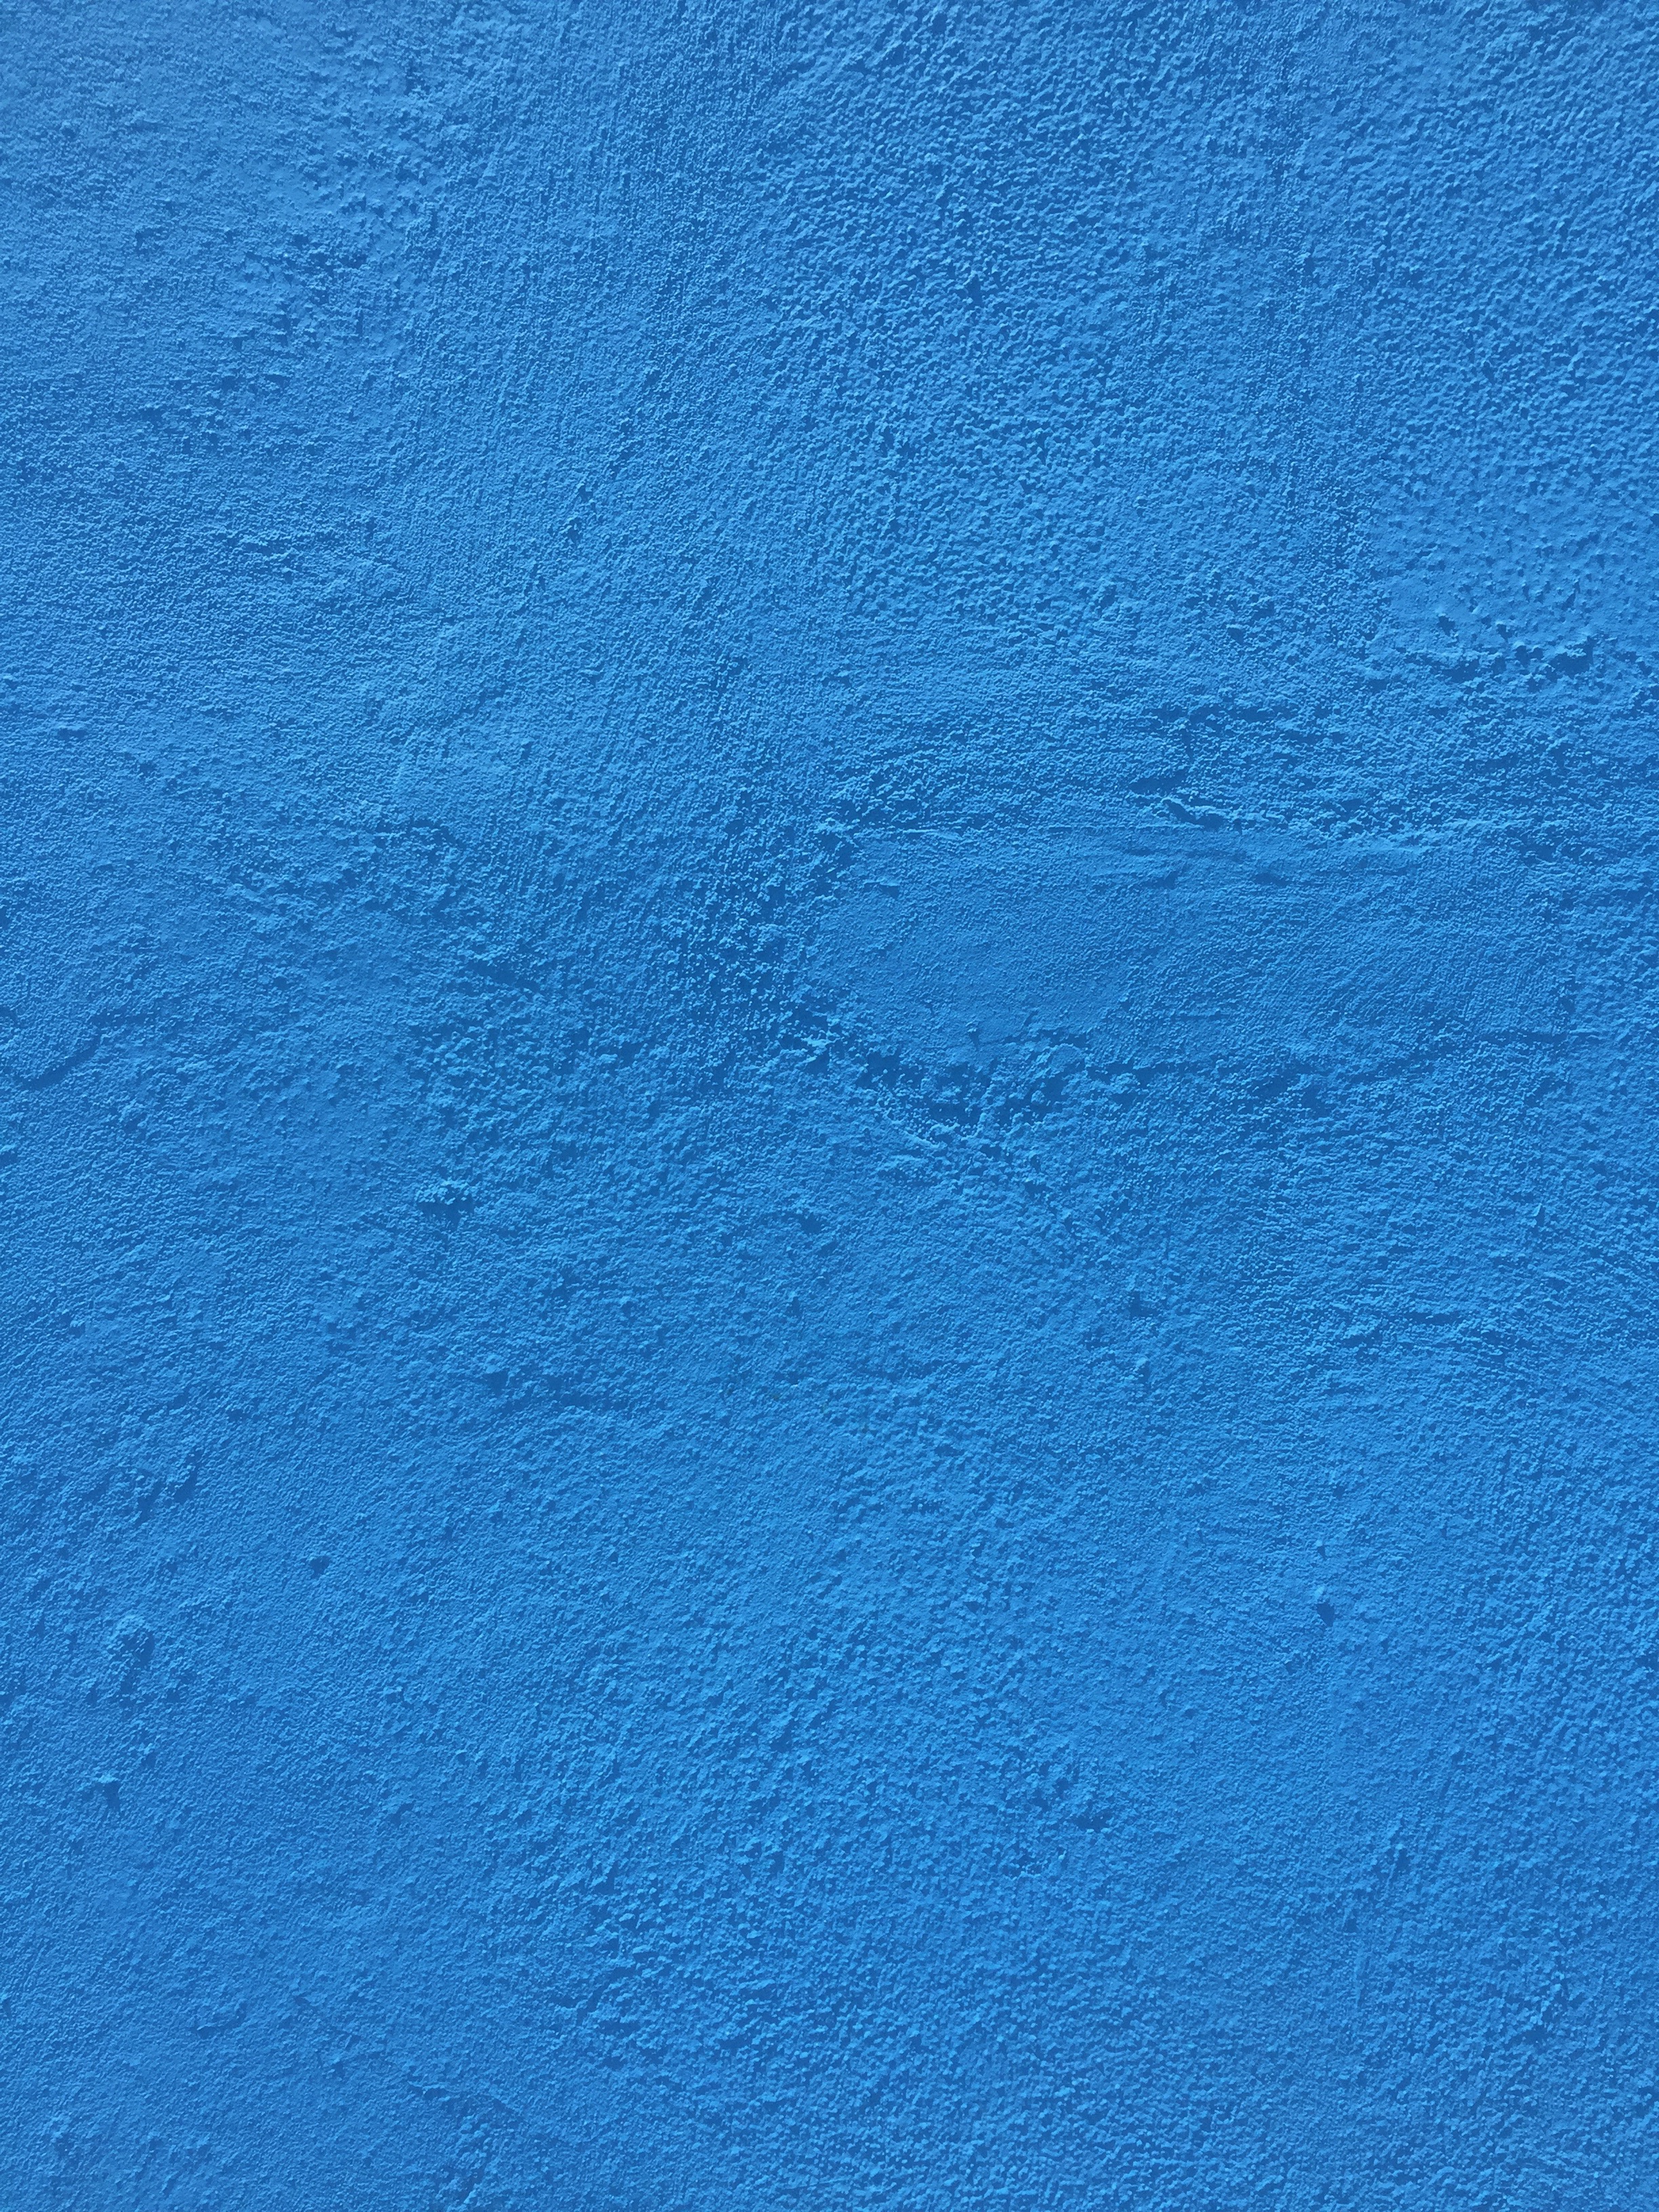 Bright blue paint over concrete wall